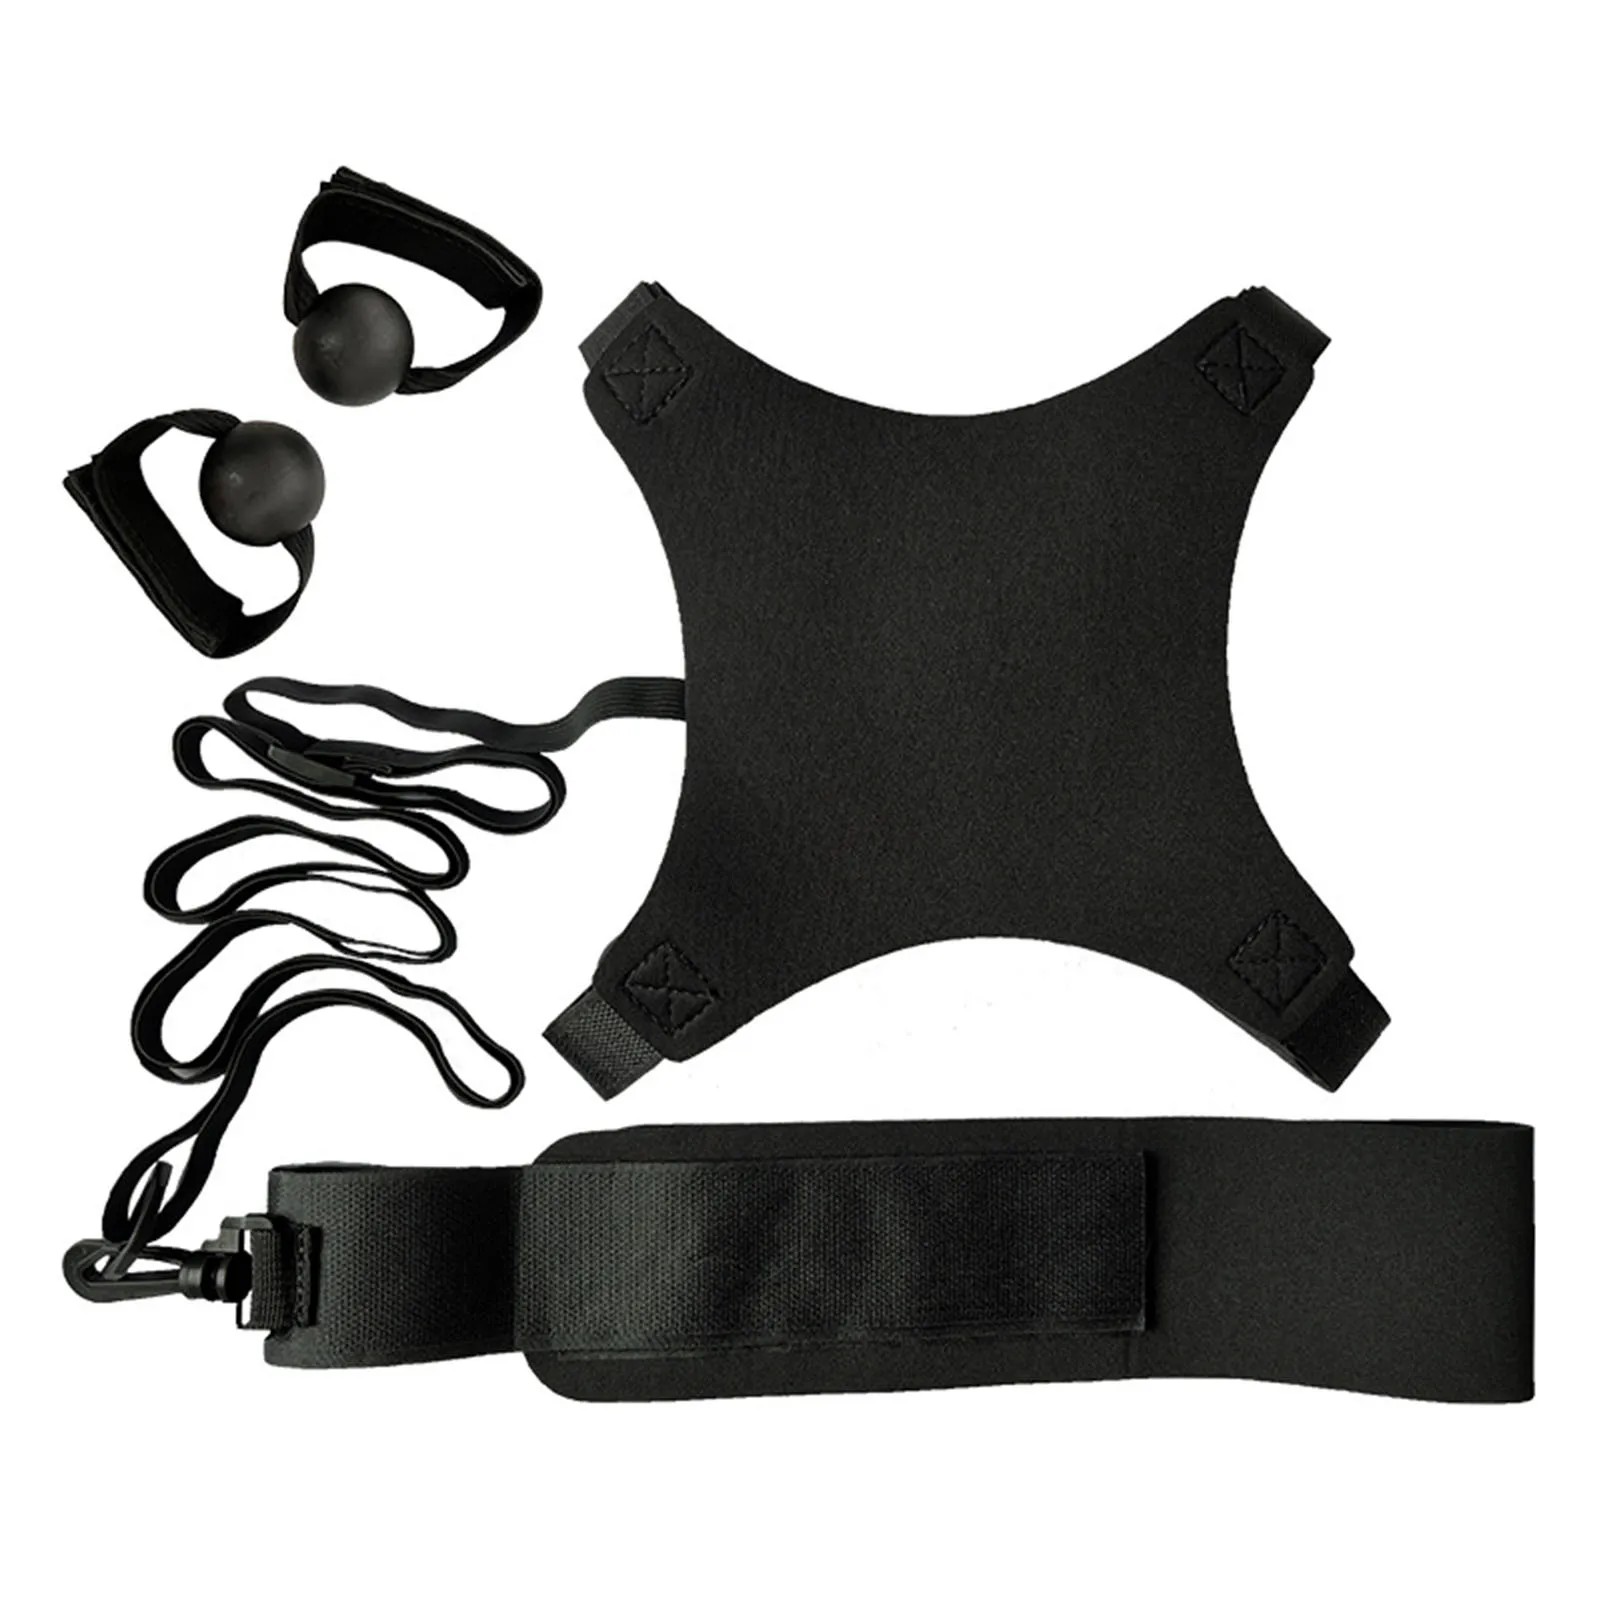 

Volleyball Training Equipment Aid Comfort and Flexibility Practice Belt for Practicing Serving Spiking